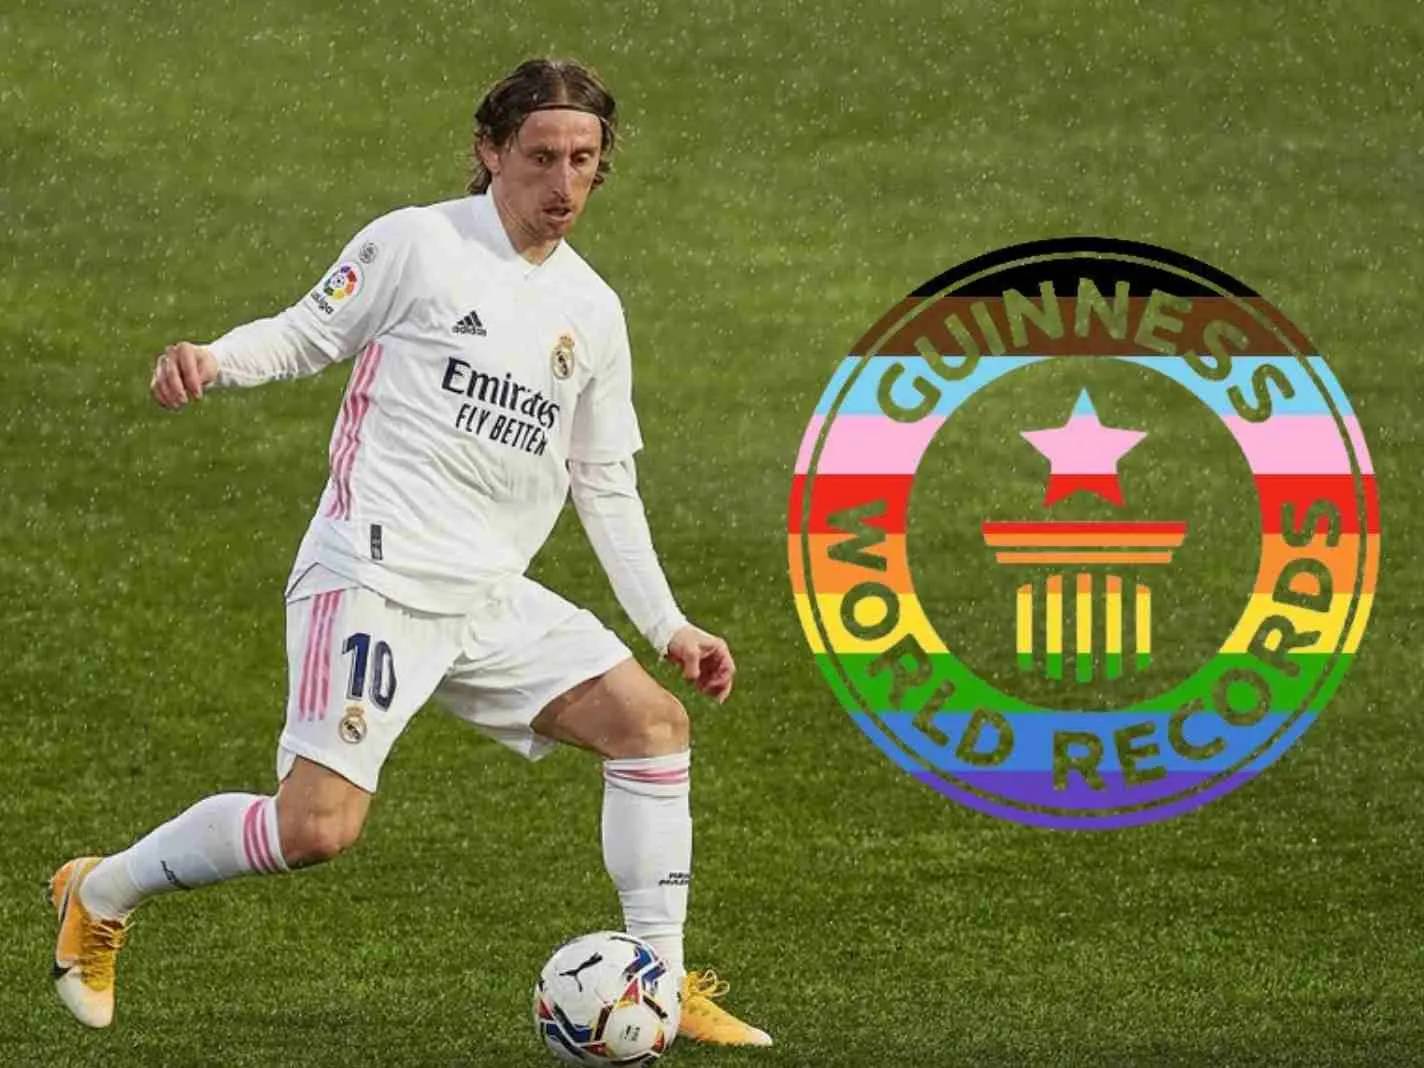 Luka Modric along with the logo of Guinness World Records